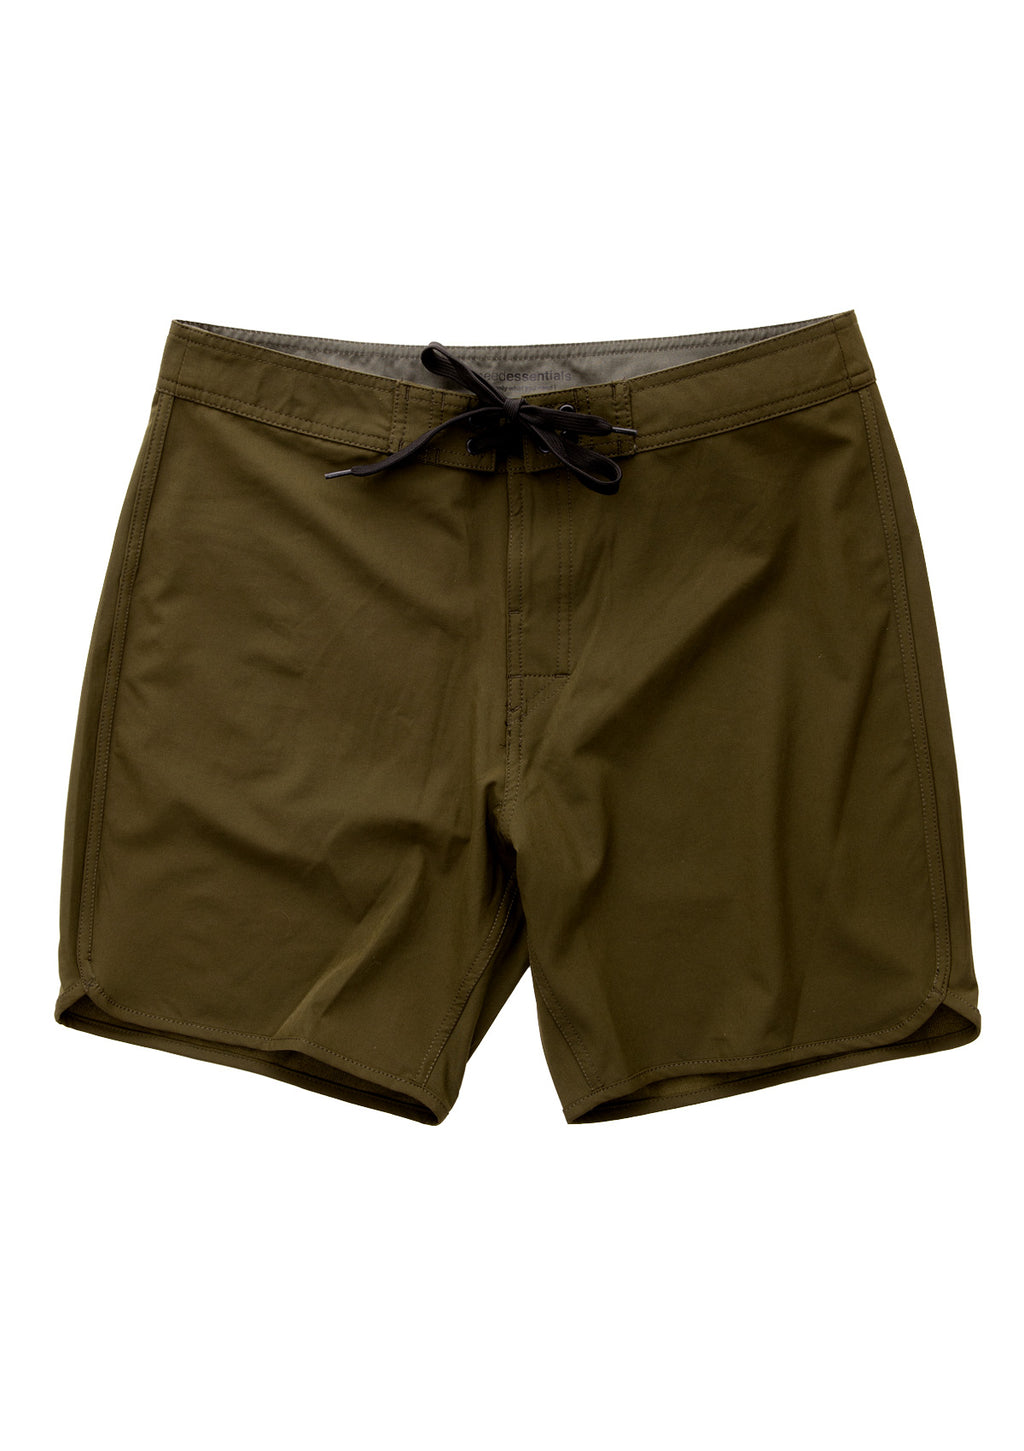 needessentials scallop mens surfing boardshorts non branded olive 